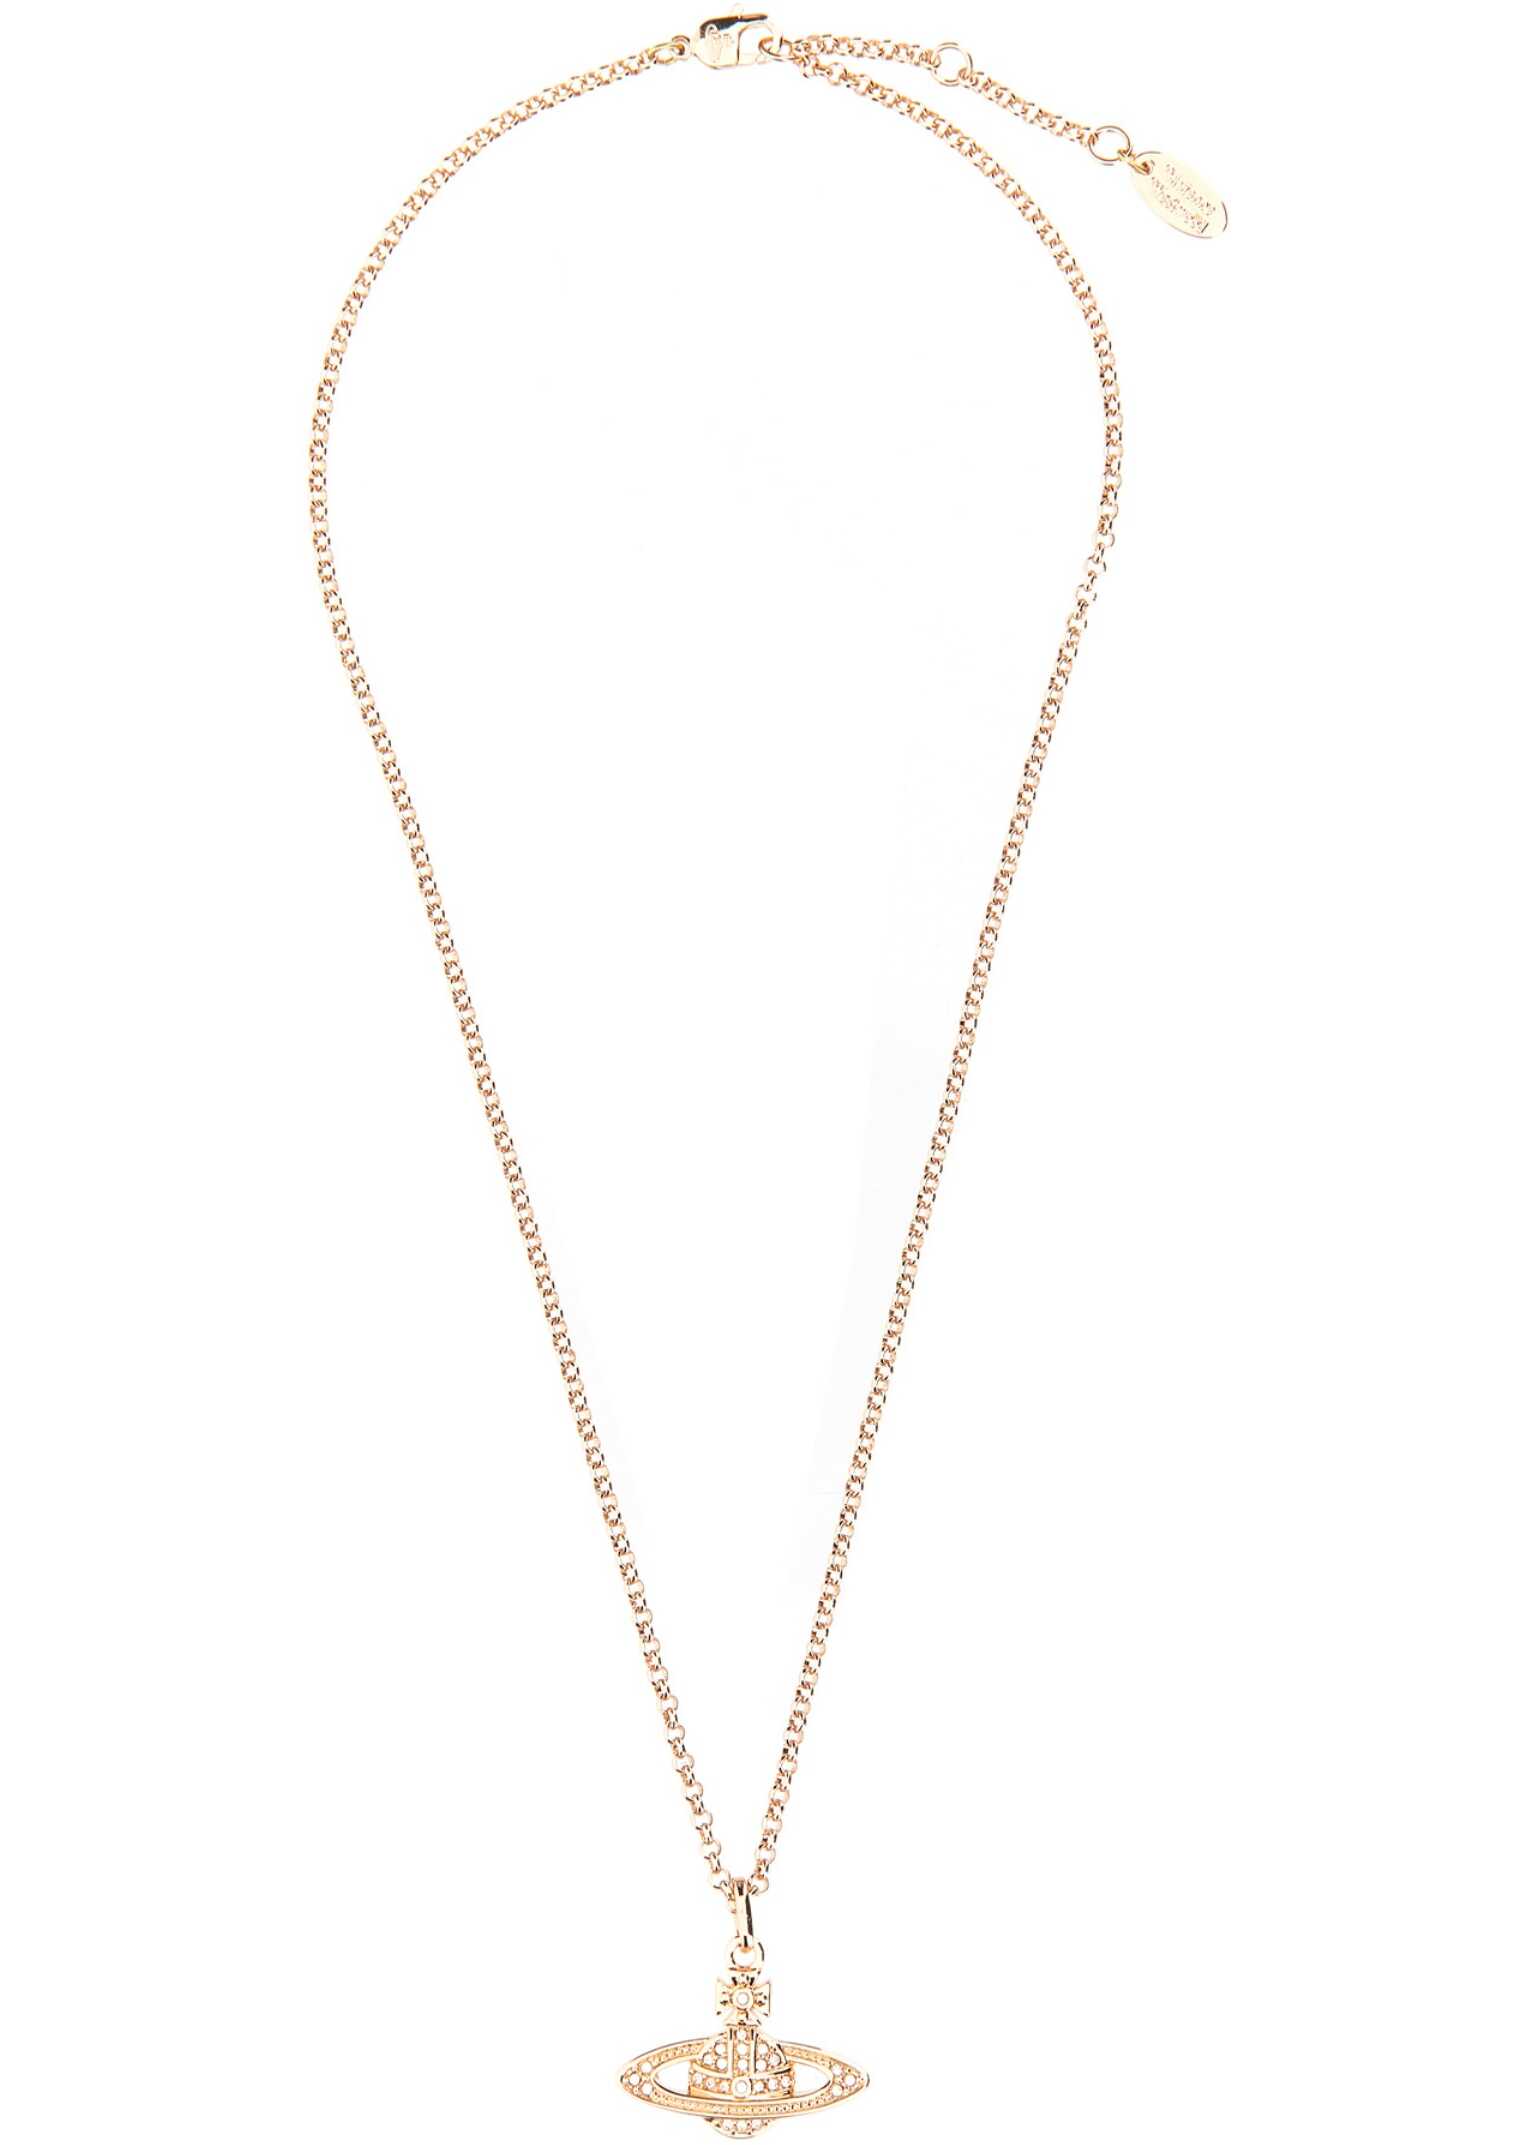 Vivienne Westwood Mini Bass Relief Necklace PINK image0